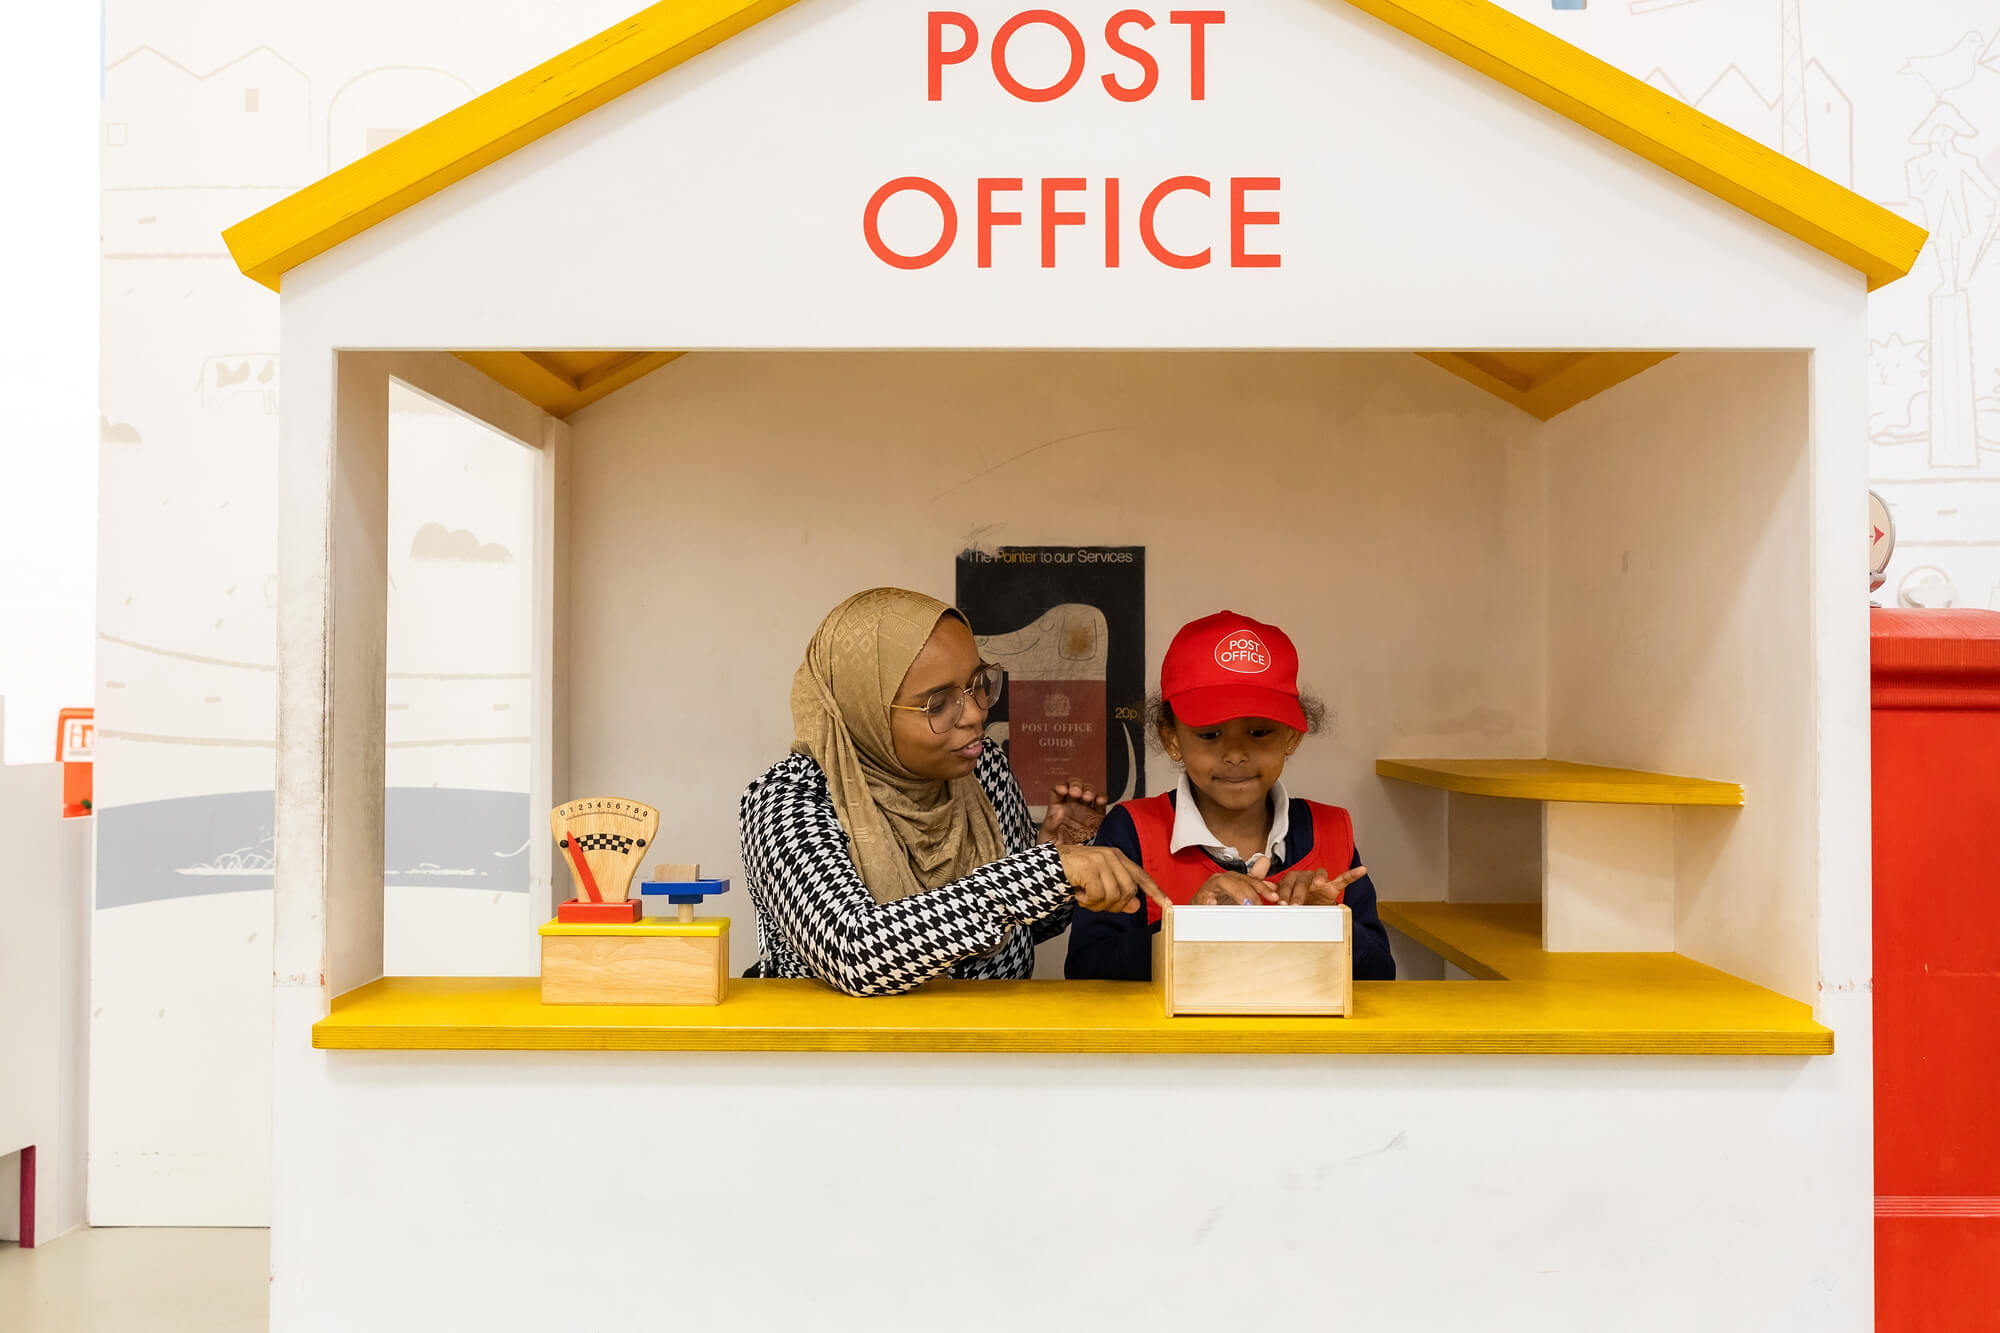 A teacher plays with her pupil in our miniature Post Office - a white shed with yellow trip. It says 'Post Office' in red font near the roof. The school child wears a red overall and red cap, as she is playing dress up. Her school uniform of a white polo shirt and blue jumper are peaking out.